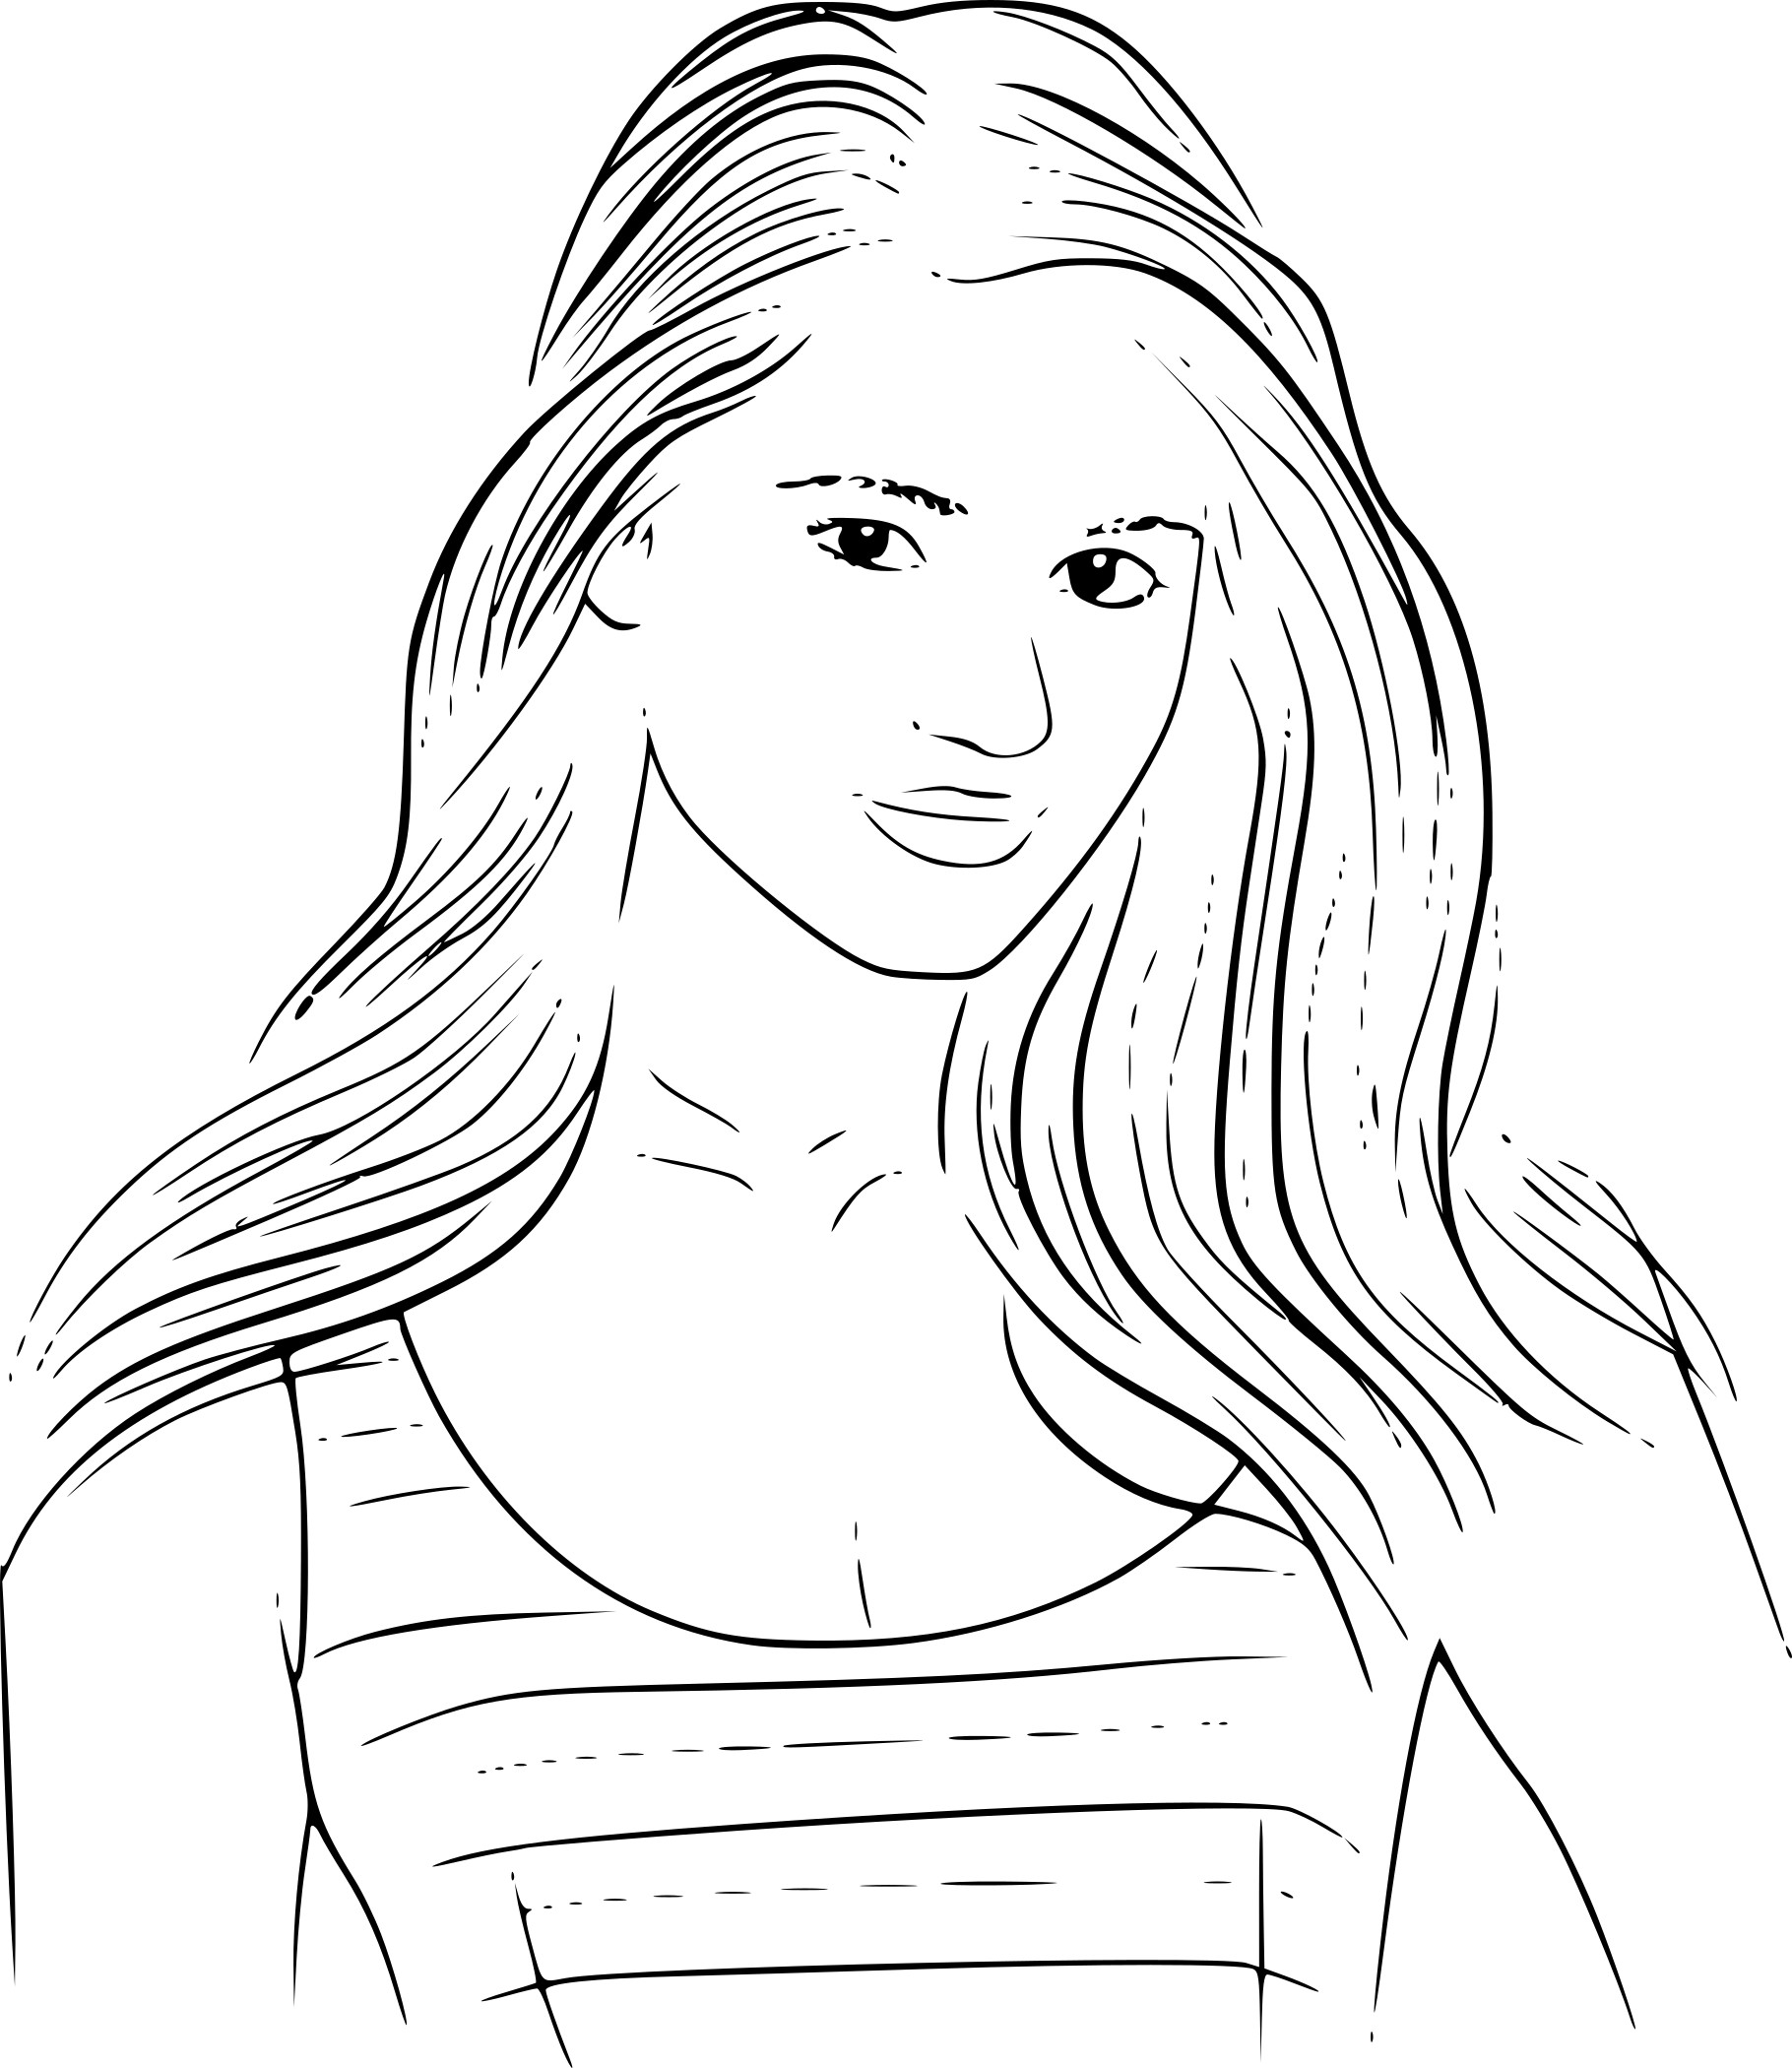 Dianna Agron coloring page